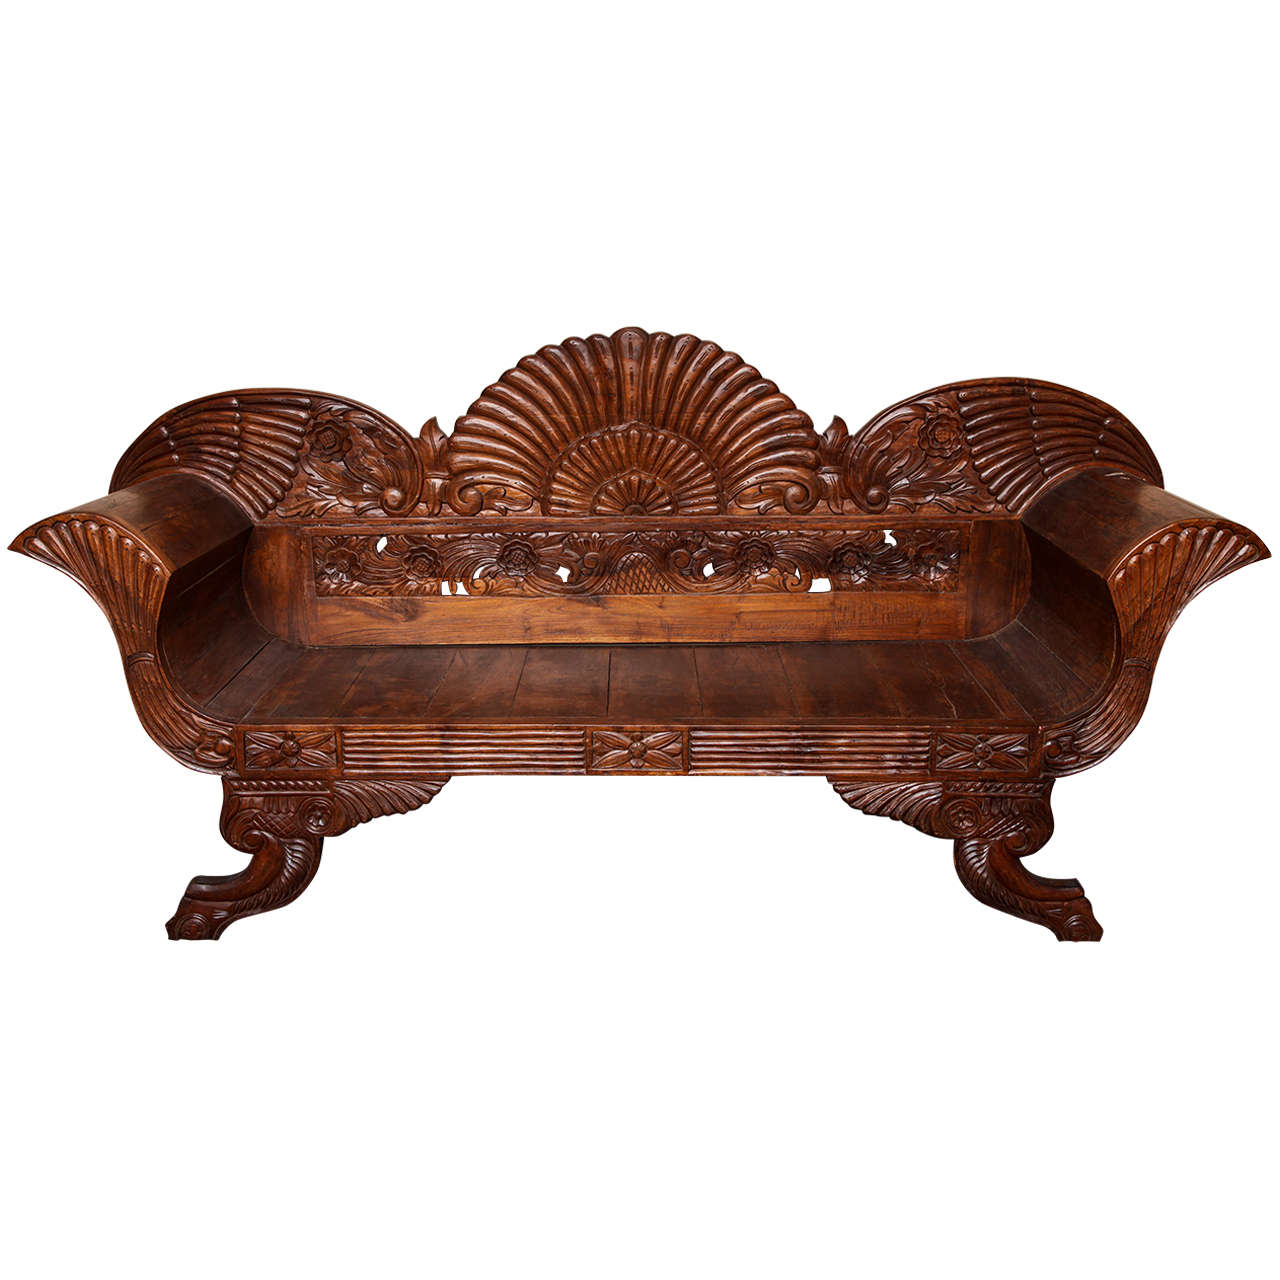 Indonesian Teak Settee with Detailed Carvings from Jakarta, 19th Century